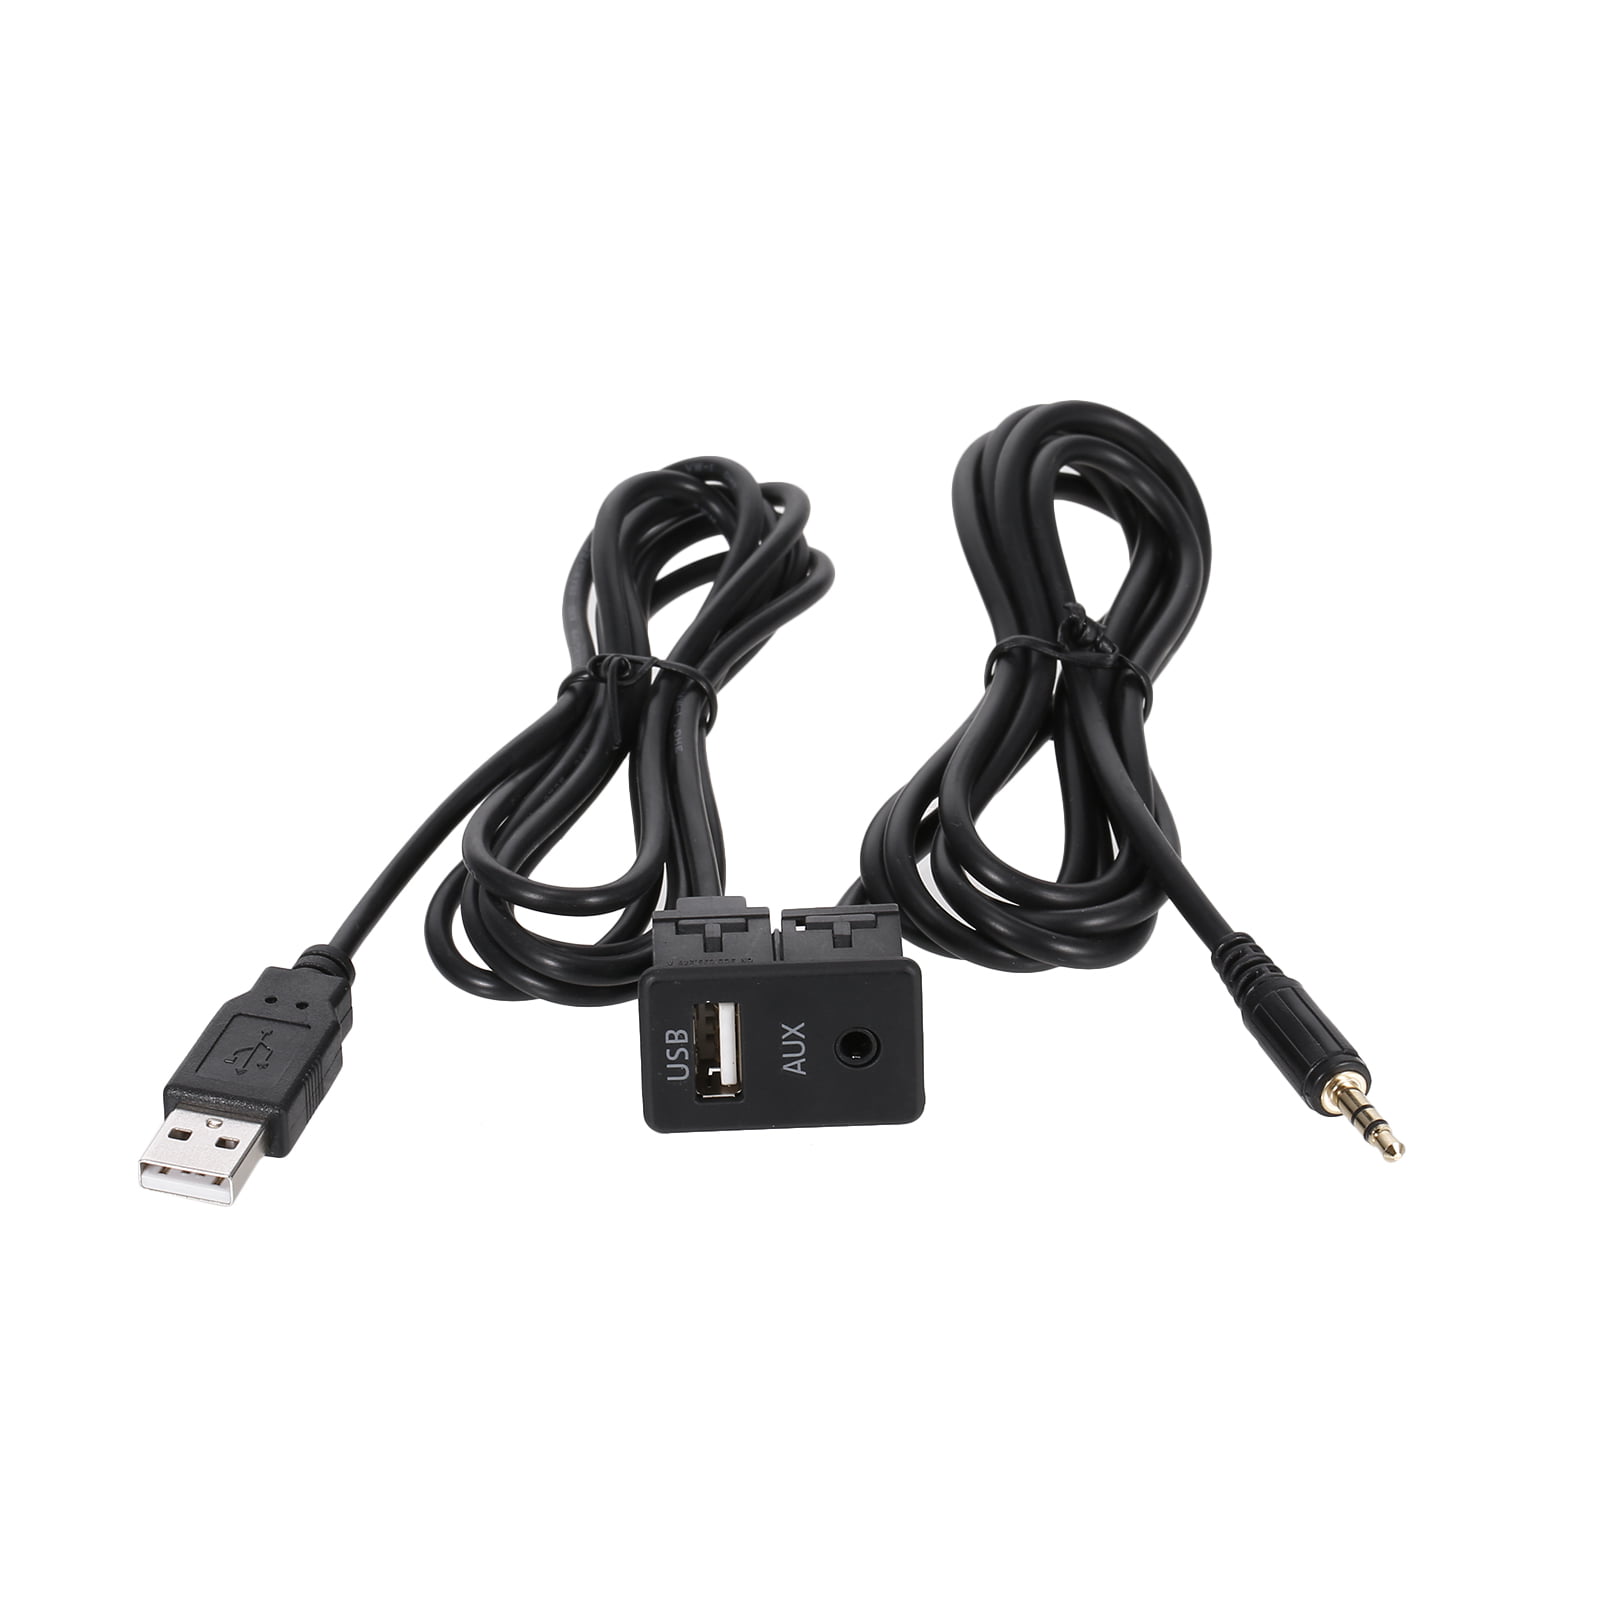 Car Boat Dash Flush Mount USB Port 3.5mm AUX Cable Lead Mounting Panel